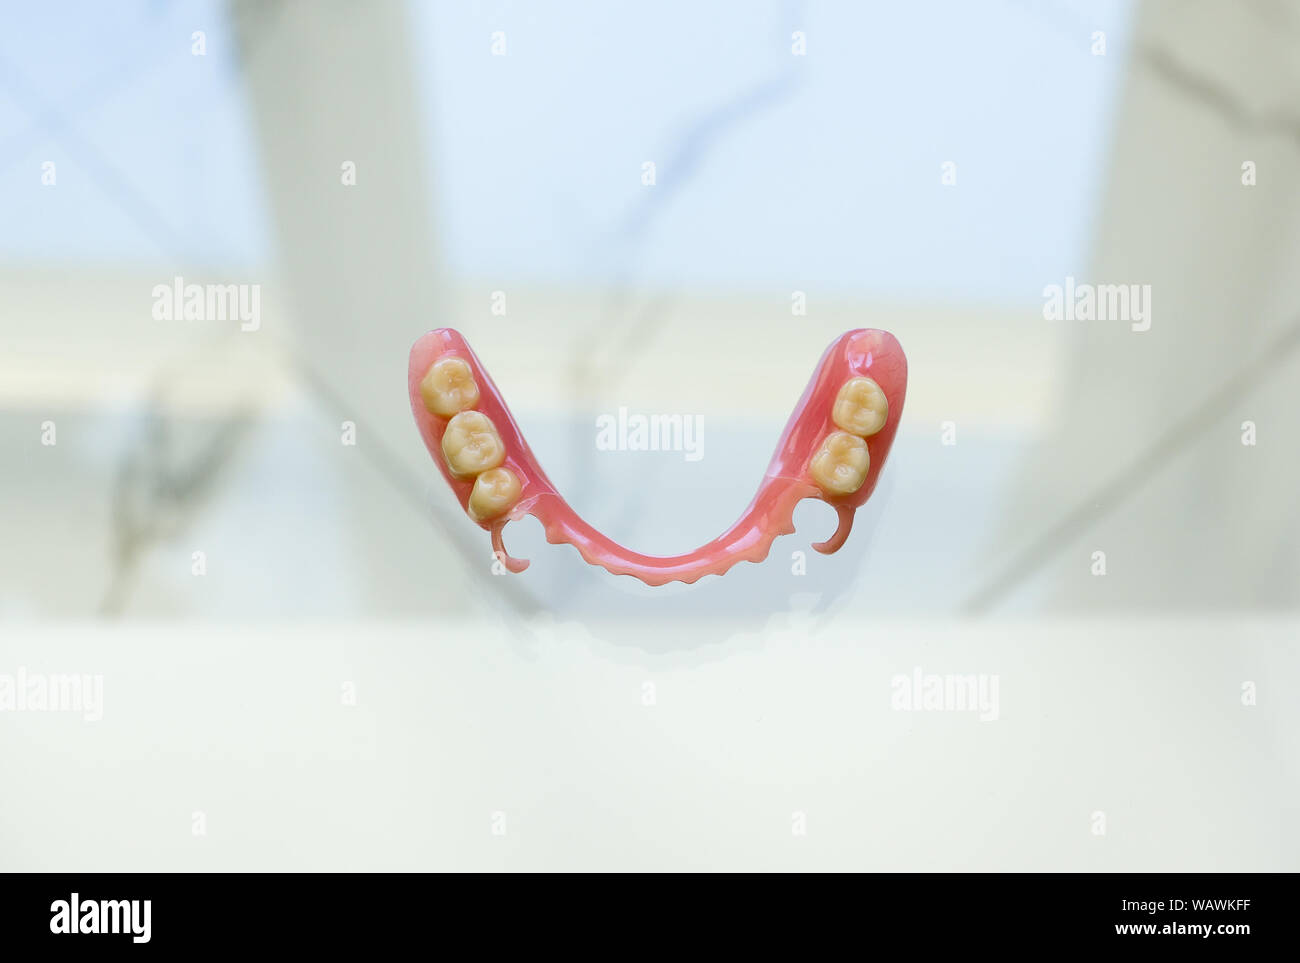 large image of a modern denture nylone on a glass background Stock Photo